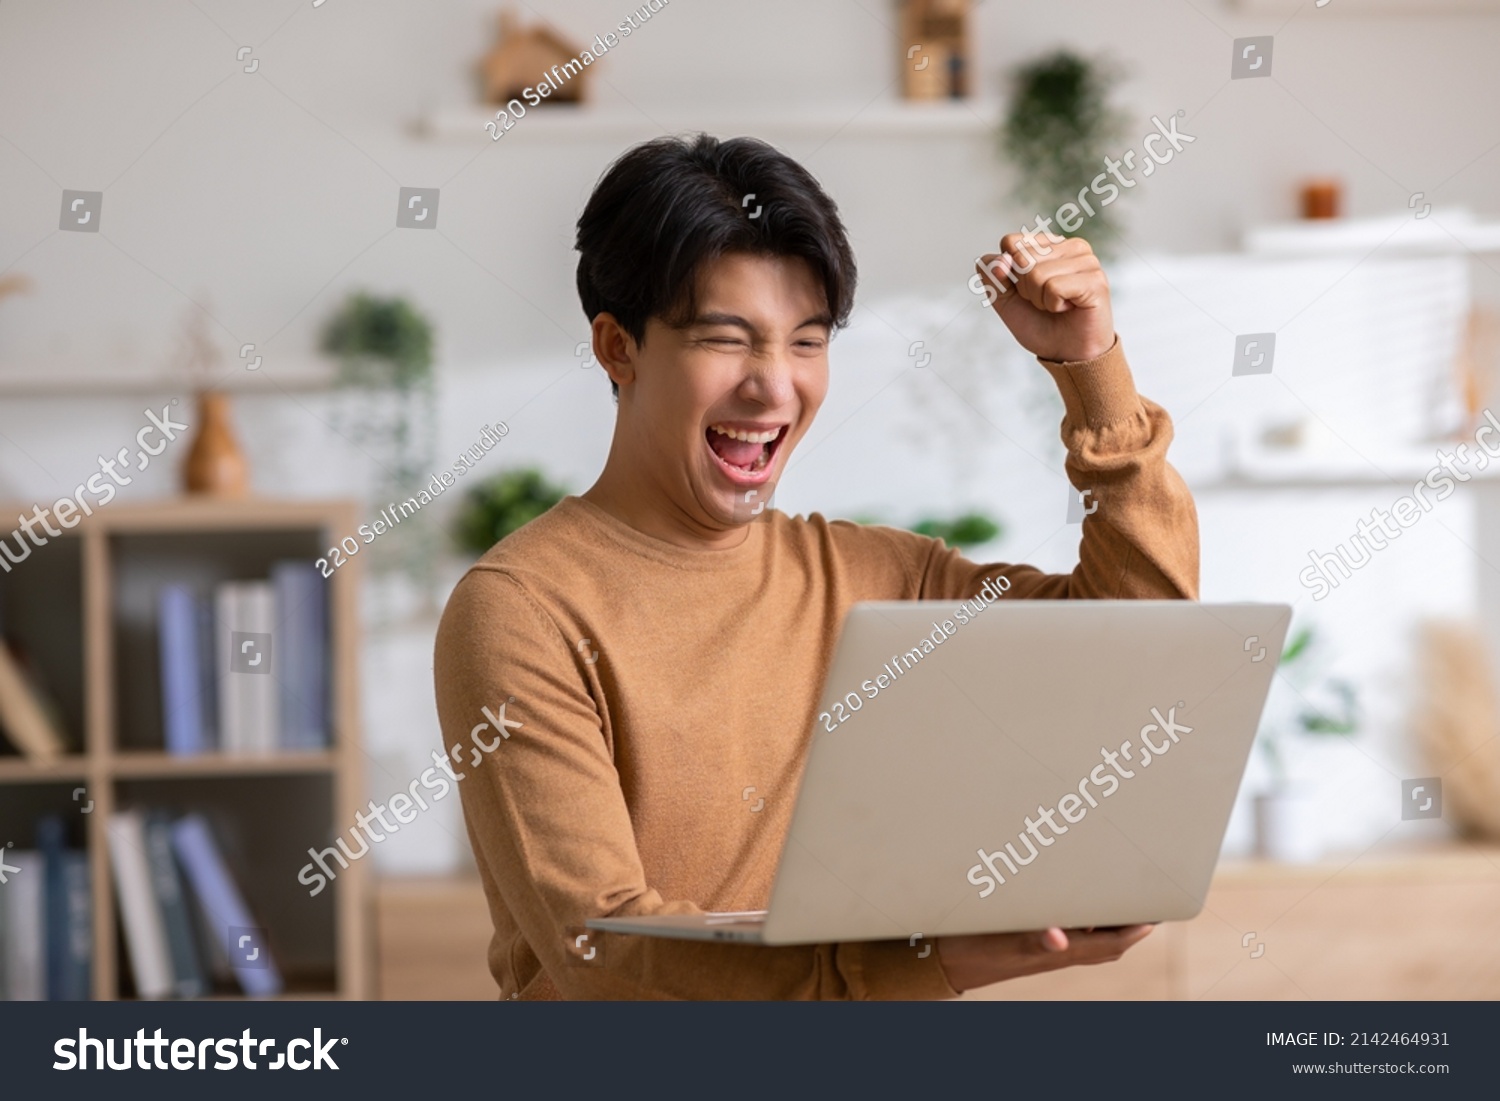 Asian man is smiling and expressing happy feeling on the computer laptop screen. young male got good news and show his cheerful face.Happiness men looking on laptop read message feel excited at home #2142464931